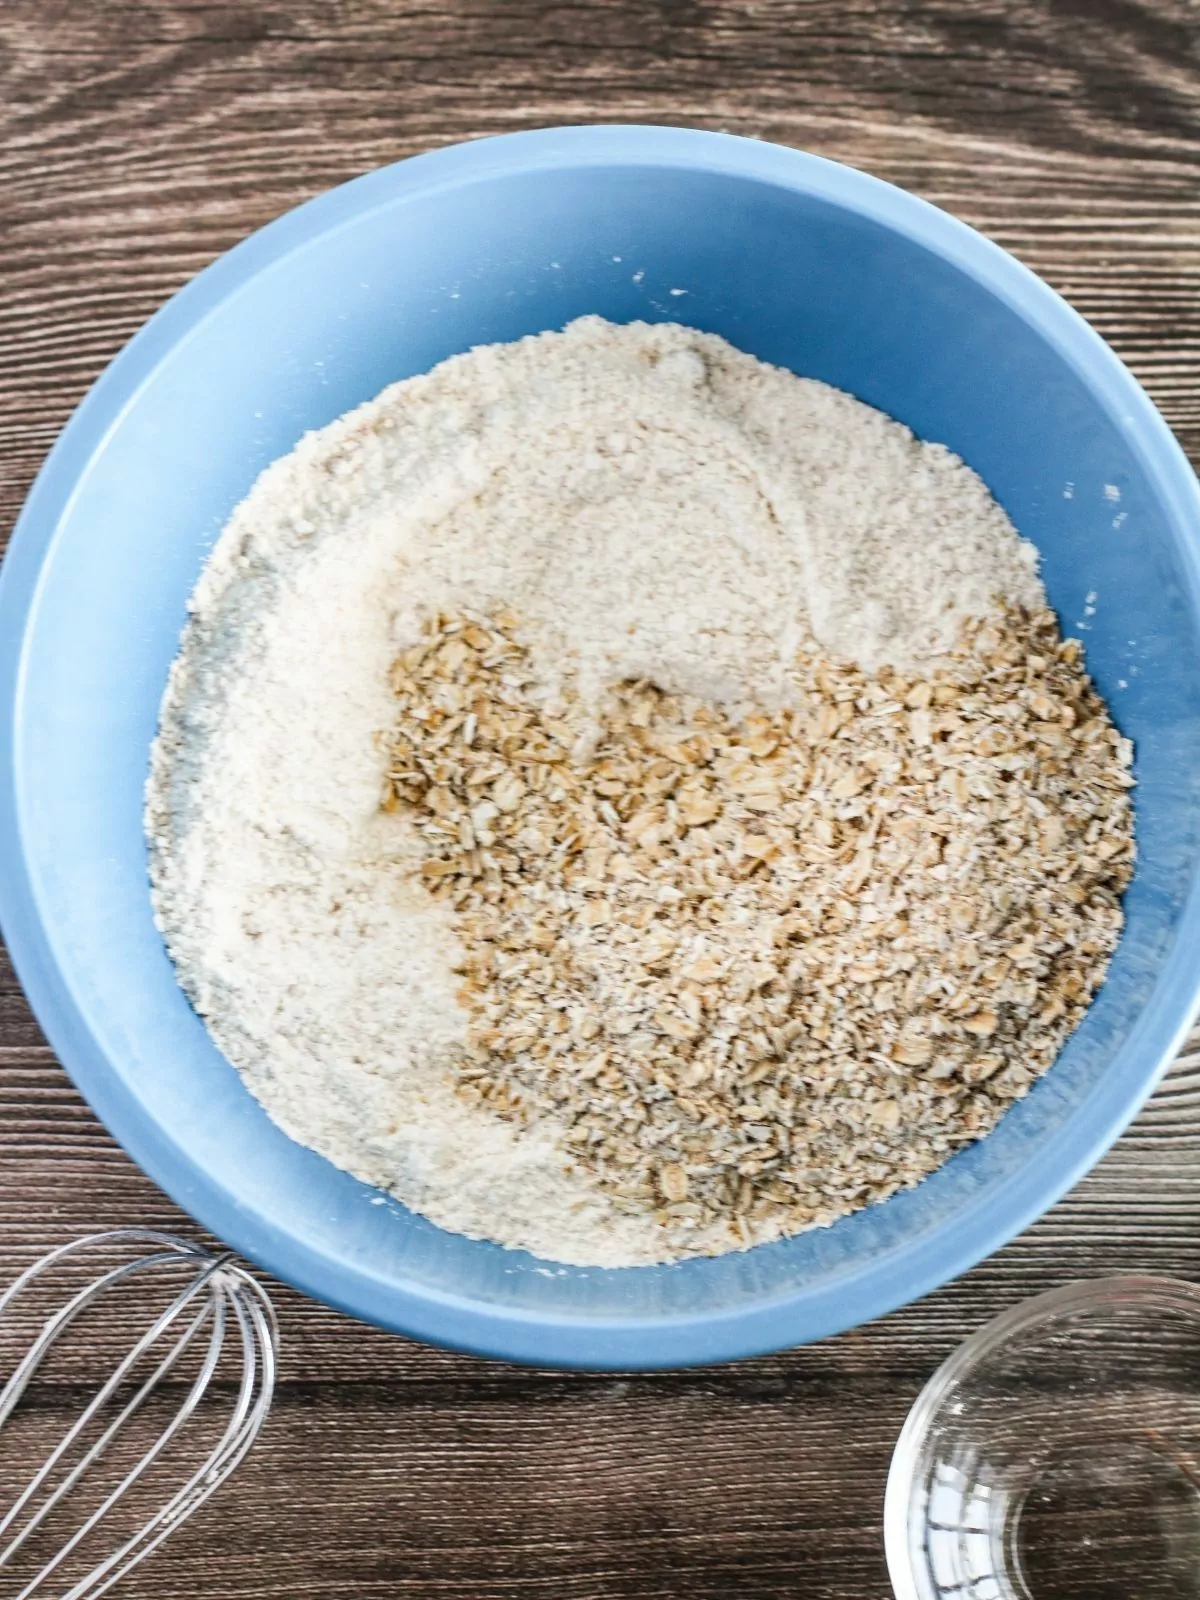 Flour mixture with oatmeal.